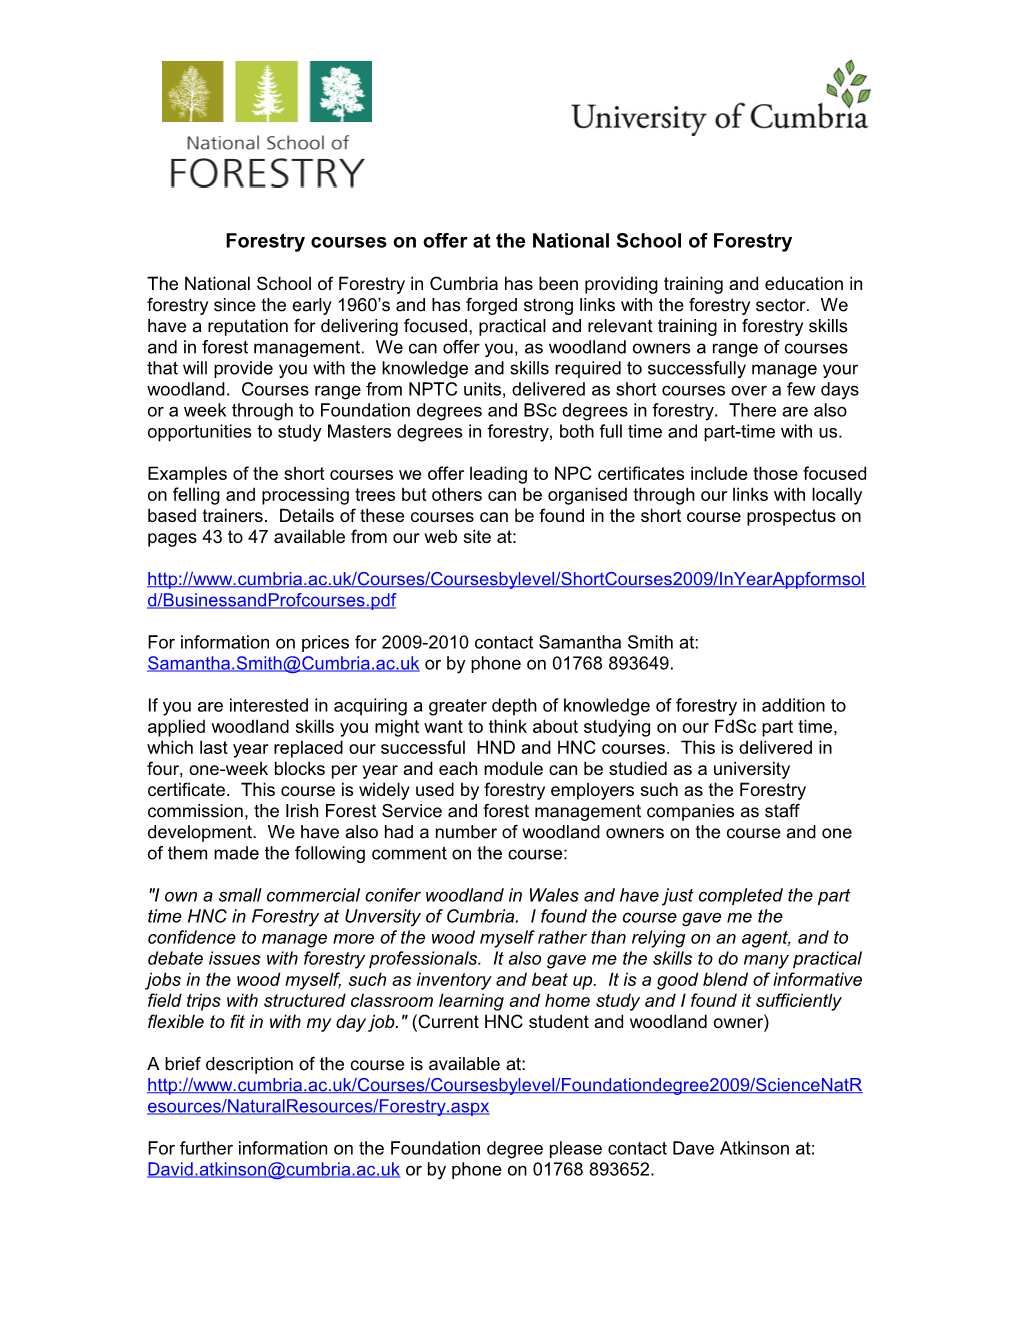 Forestry Courses on Offer at the National School of Forestry